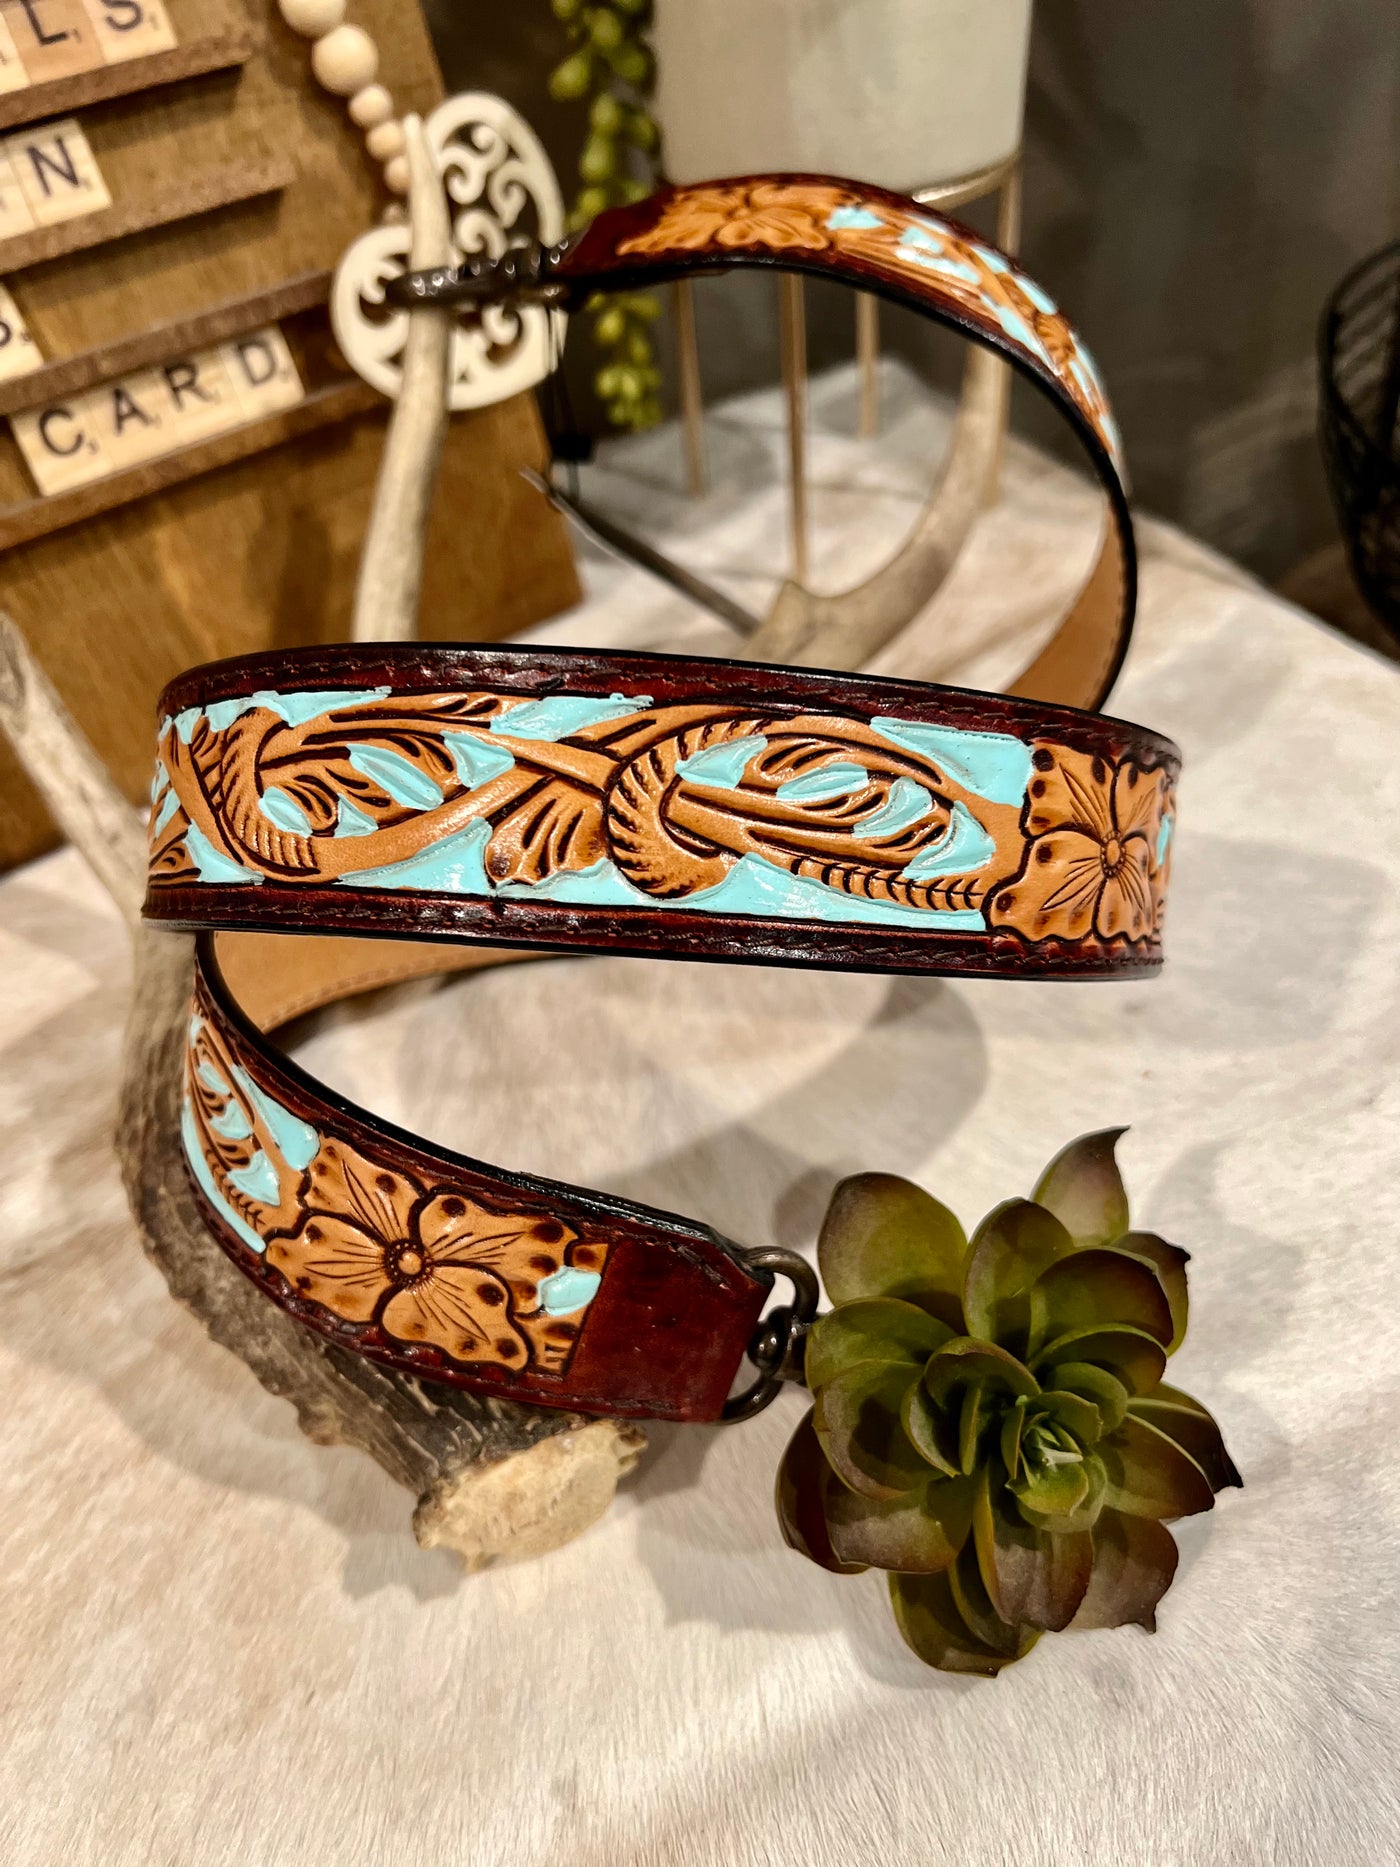 Tooled Leather Purse Strap ~ Turquoise Inlay